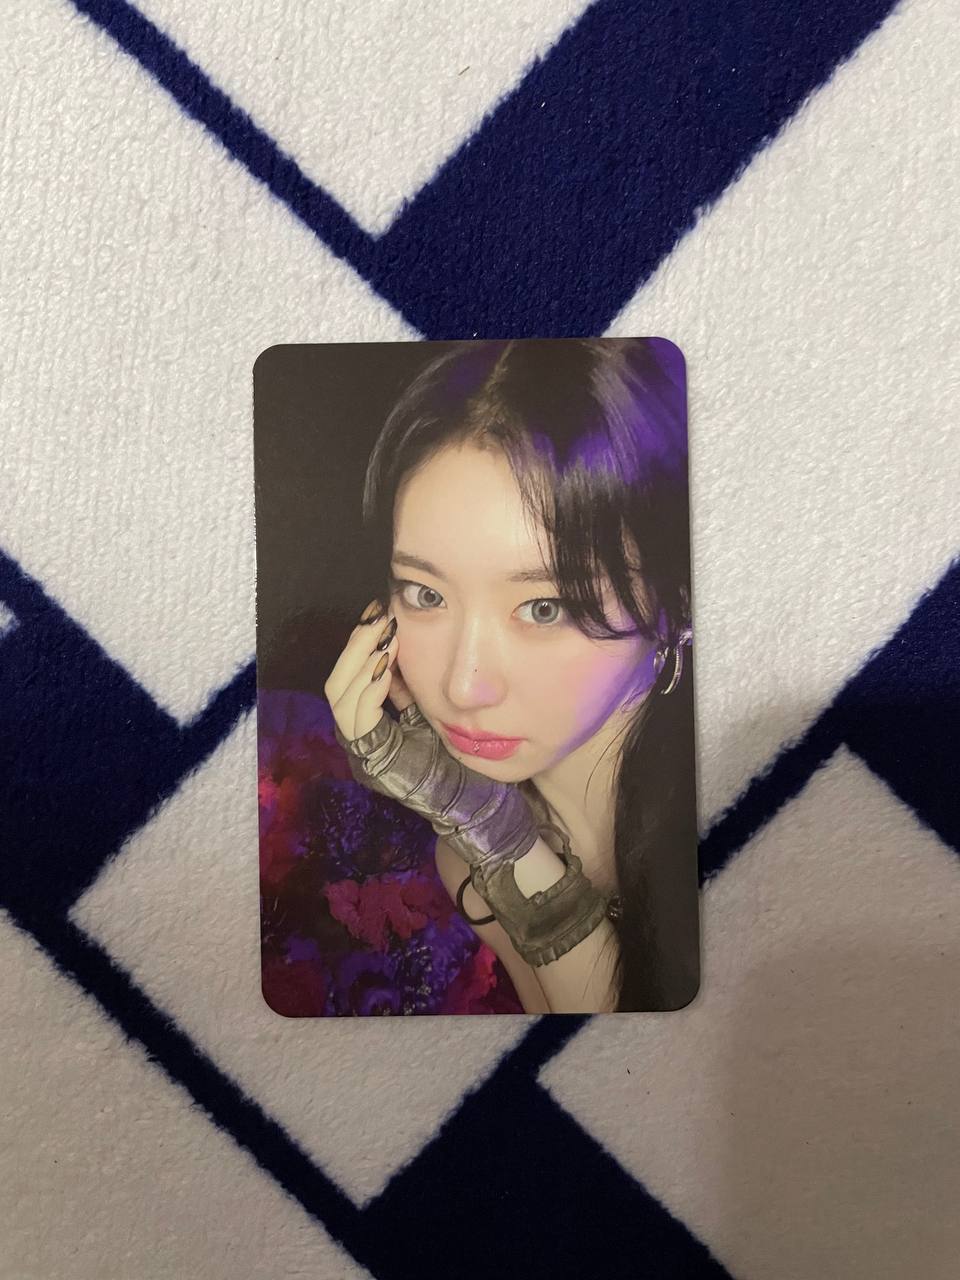 ITZY - Born to Be Limited Ver. (Official Photocard)